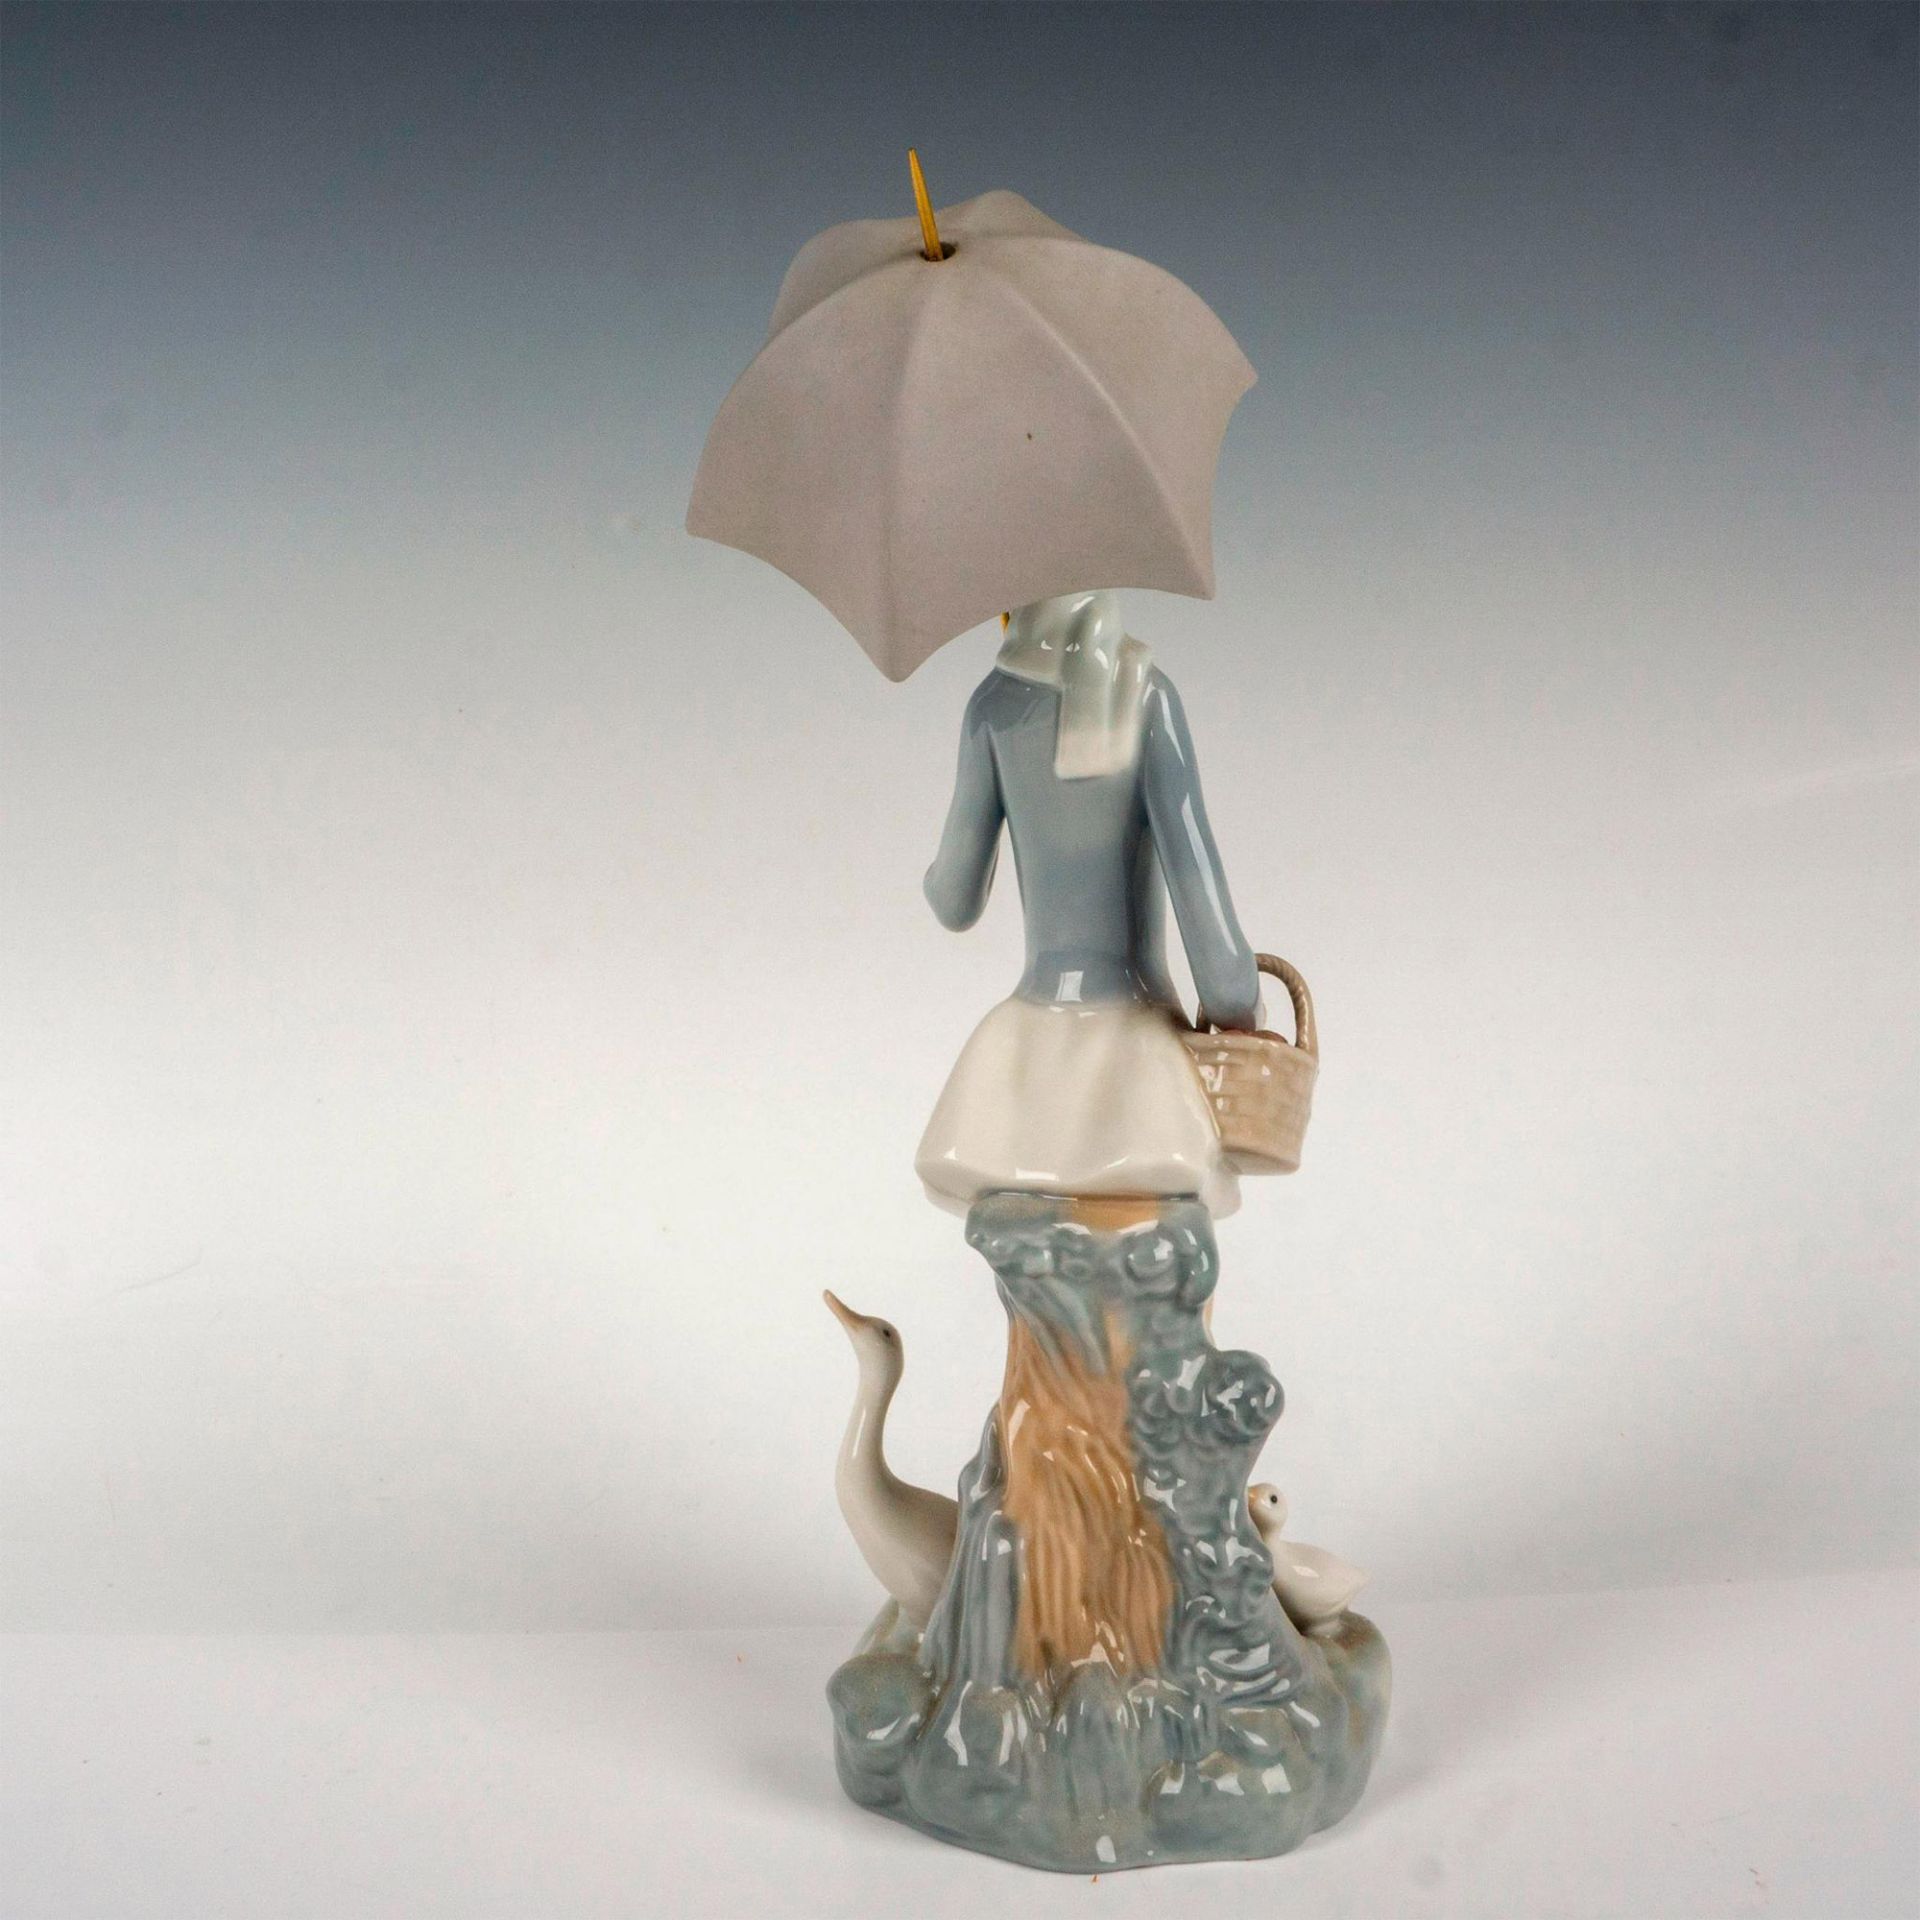 Girl With Umbrella And Geese 1004510 - Lladro Porcelain Figurine - Image 2 of 3